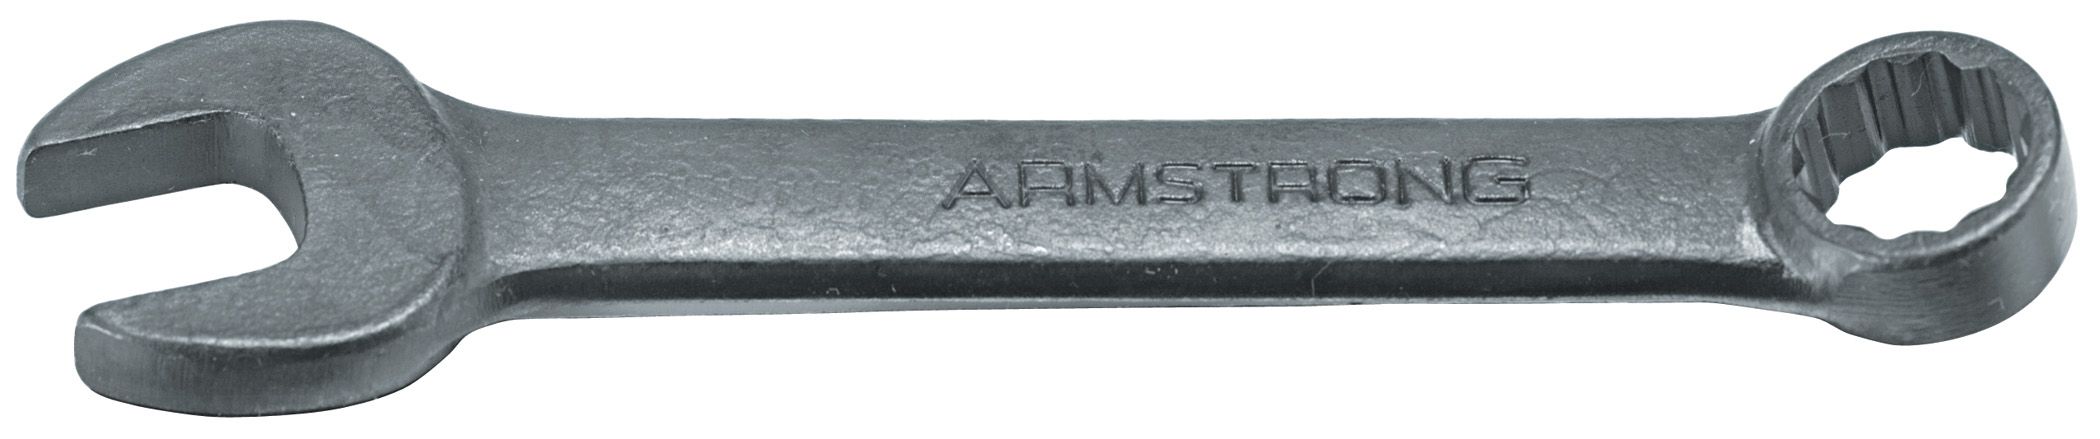 Armstrong 1/2 in. 12 pt. Black Oxide Short Combination Wrench